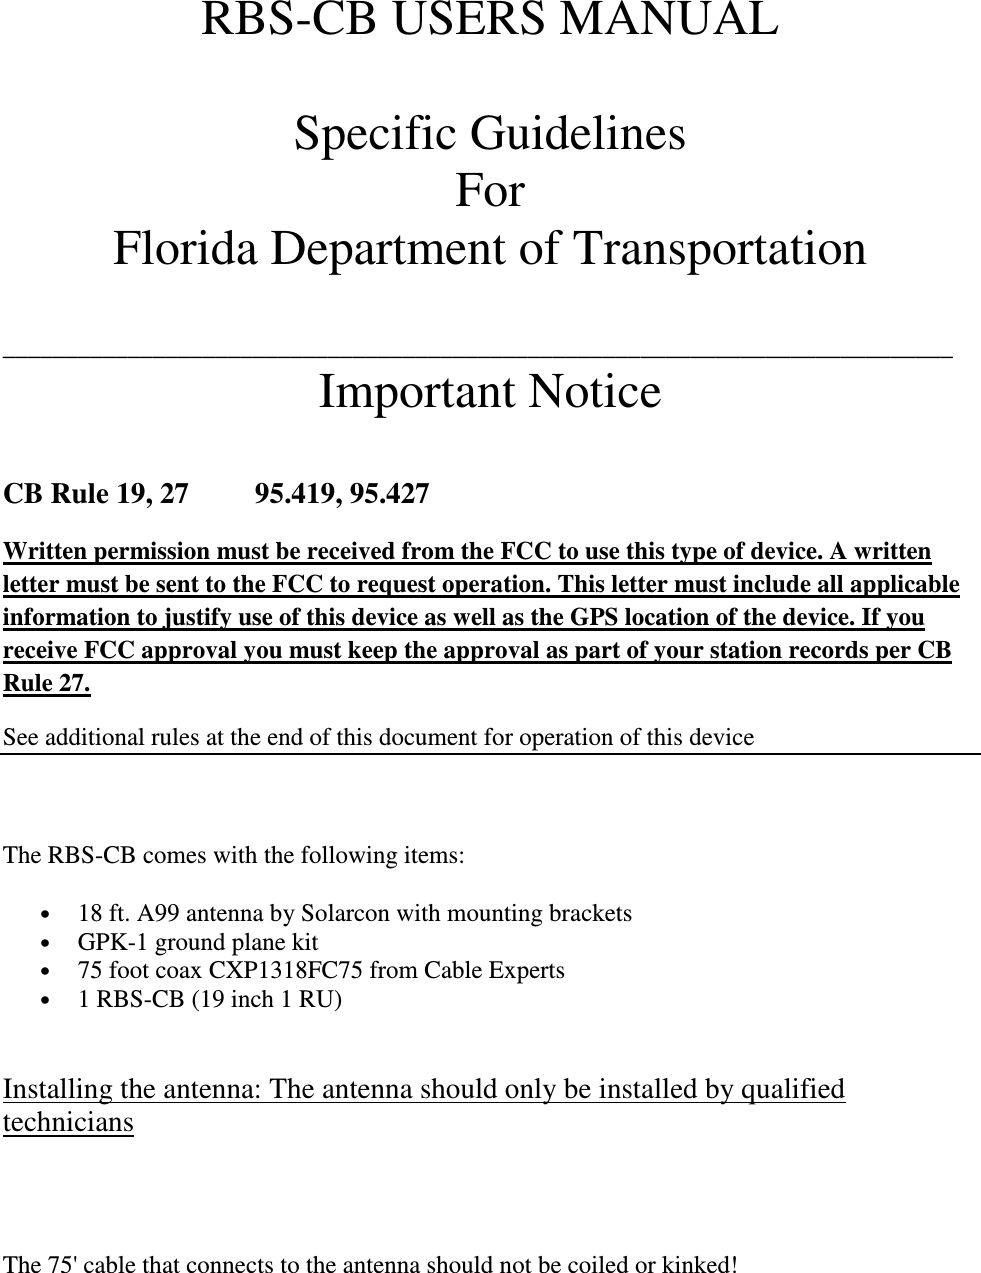 RBS-CB USERS MANUAL  Specific Guidelines  For  Florida Department of Transportation   ____________________________________________________________________________ Important Notice   CB Rule 19, 27         95.419, 95.427 Written permission must be received from the FCC to use this type of device. A written letter must be sent to the FCC to request operation. This letter must include all applicable information to justify use of this device as well as the GPS location of the device. If you receive FCC approval you must keep the approval as part of your station records per CB Rule 27. See additional rules at the end of this document for operation of this device     The RBS-CB comes with the following items: • 18 ft. A99 antenna by Solarcon with mounting brackets • GPK-1 ground plane kit • 75 foot coax CXP1318FC75 from Cable Experts • 1 RBS-CB (19 inch 1 RU)  Installing the antenna: The antenna should only be installed by qualified technicians   The 75&apos; cable that connects to the antenna should not be coiled or kinked!  